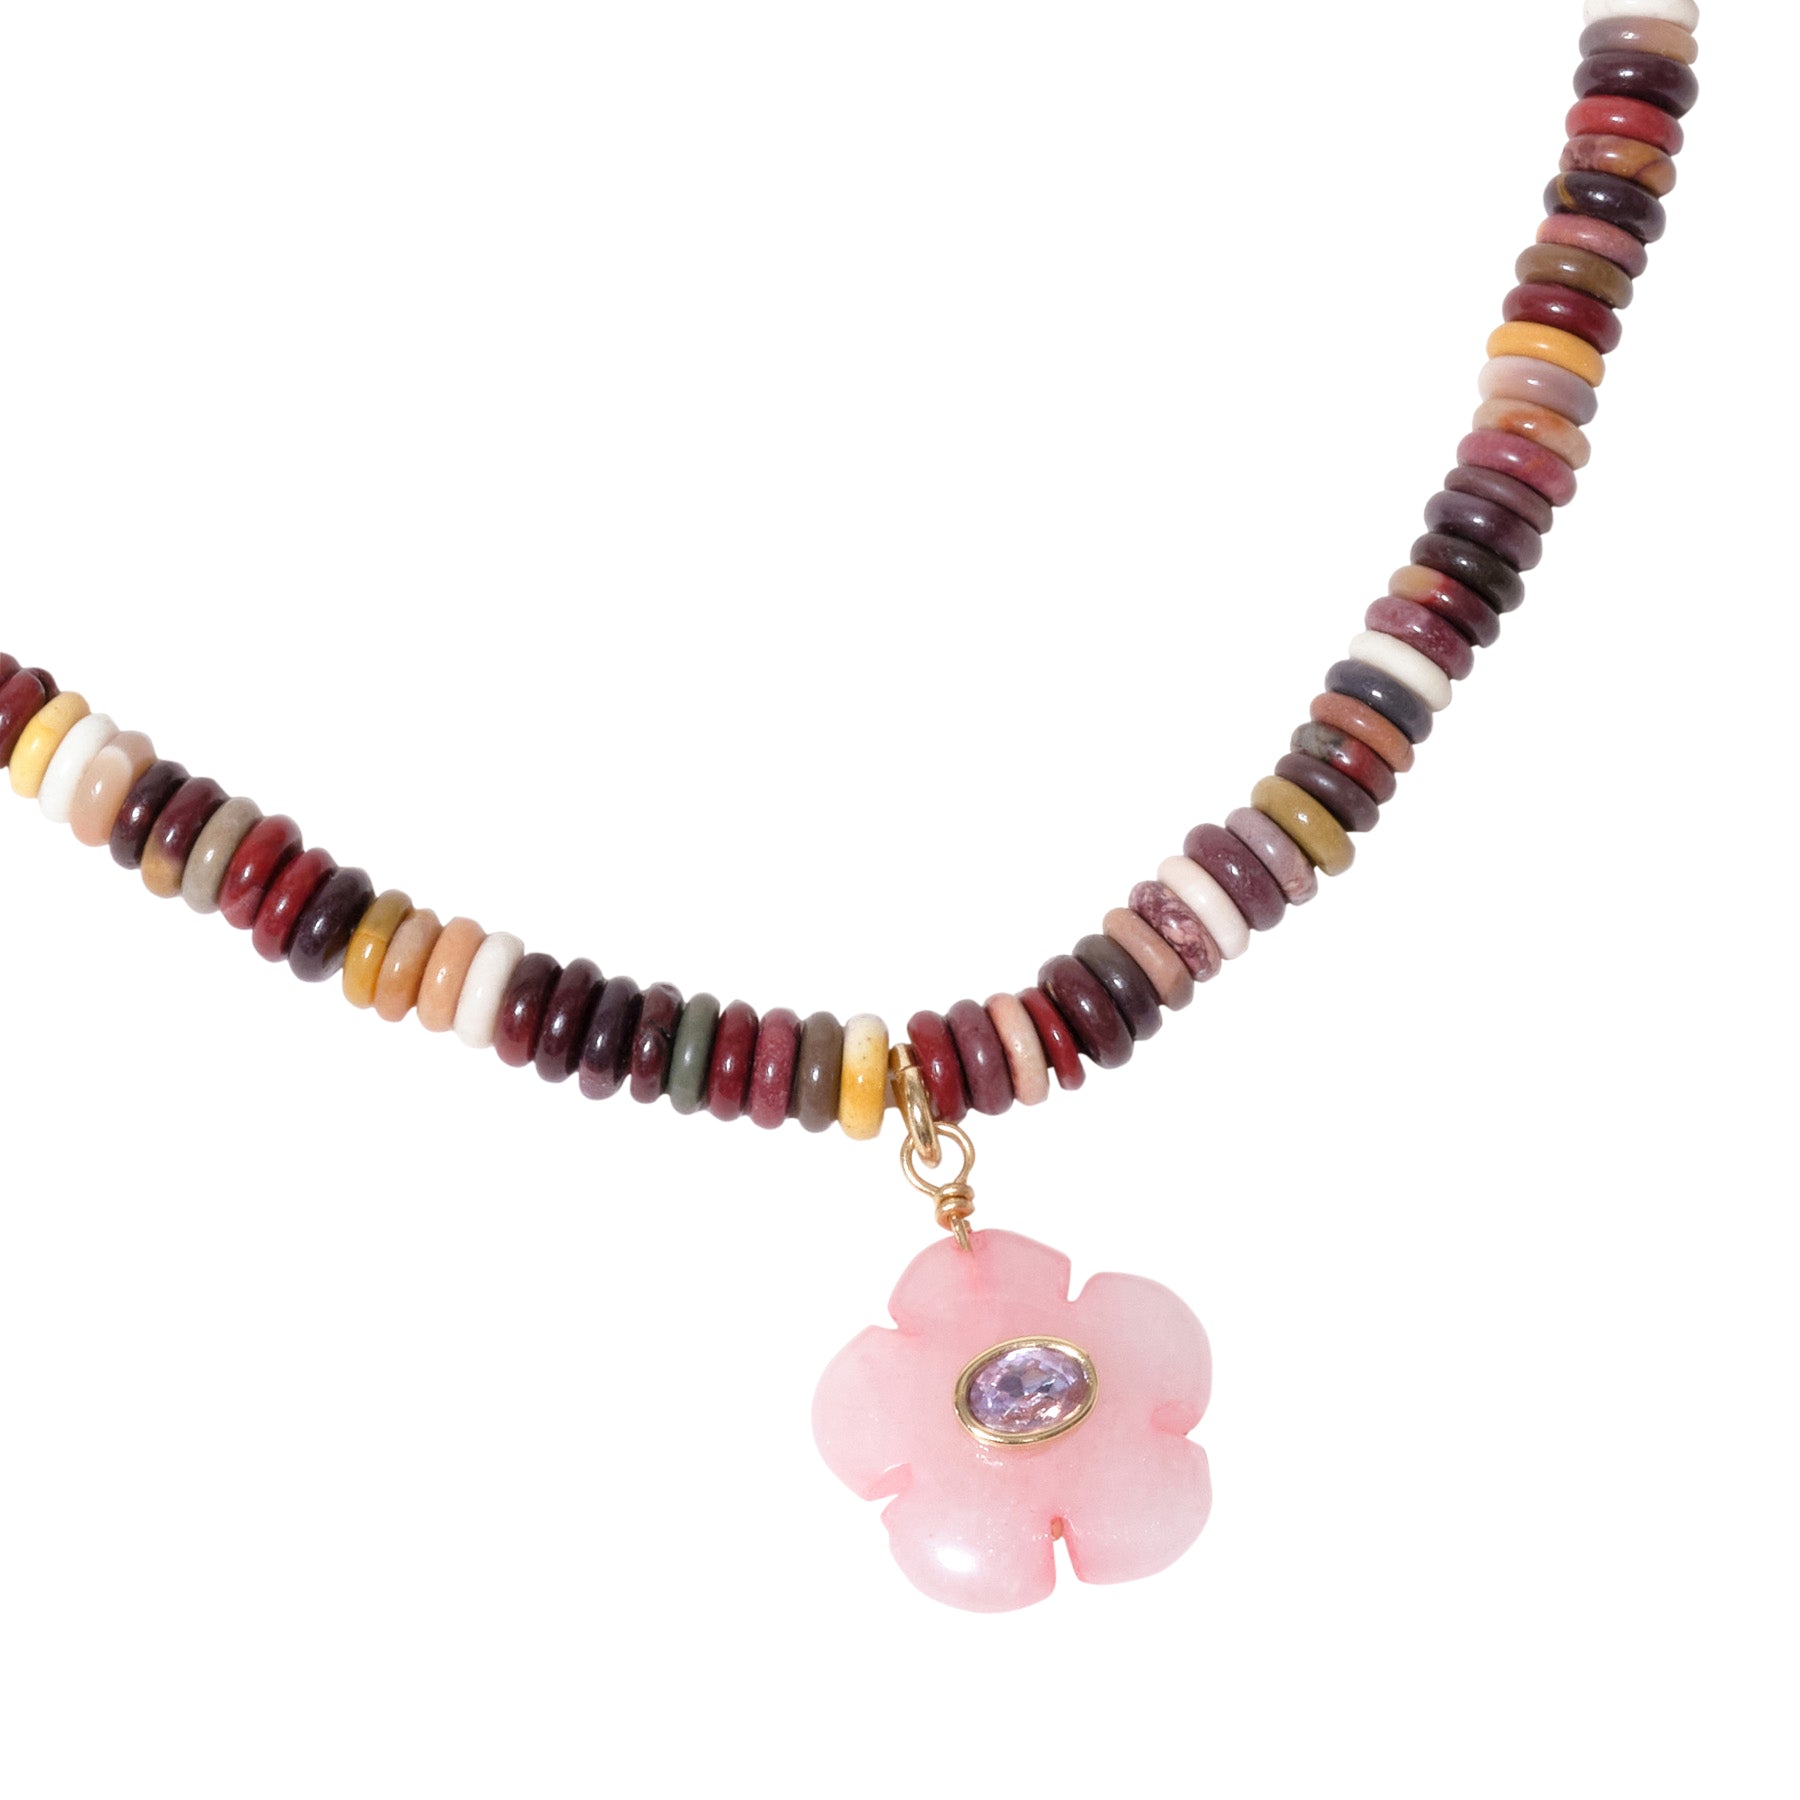 Brown and Neutral Strand Necklace with Pink Flower Charm on Flat White Background